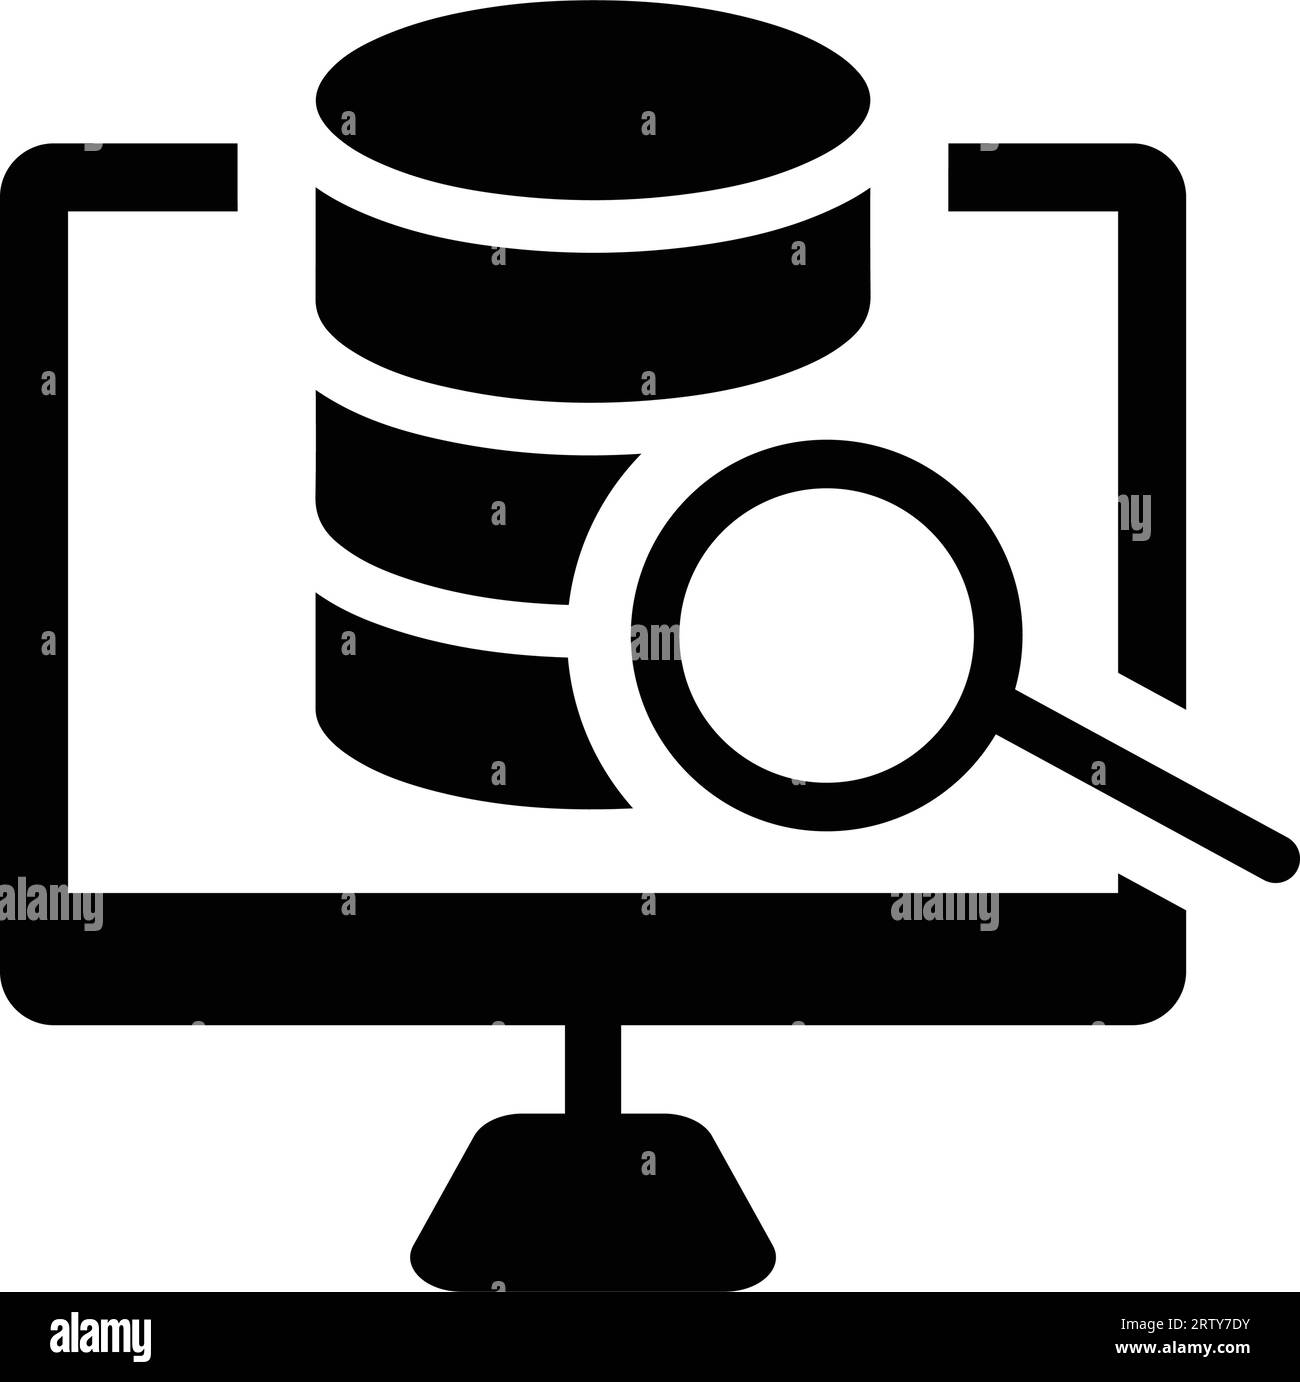 Big Data Analysis icon. Commercial use, printed files and presentations, Promotional Materials, web or any type of design project. Stock Vector